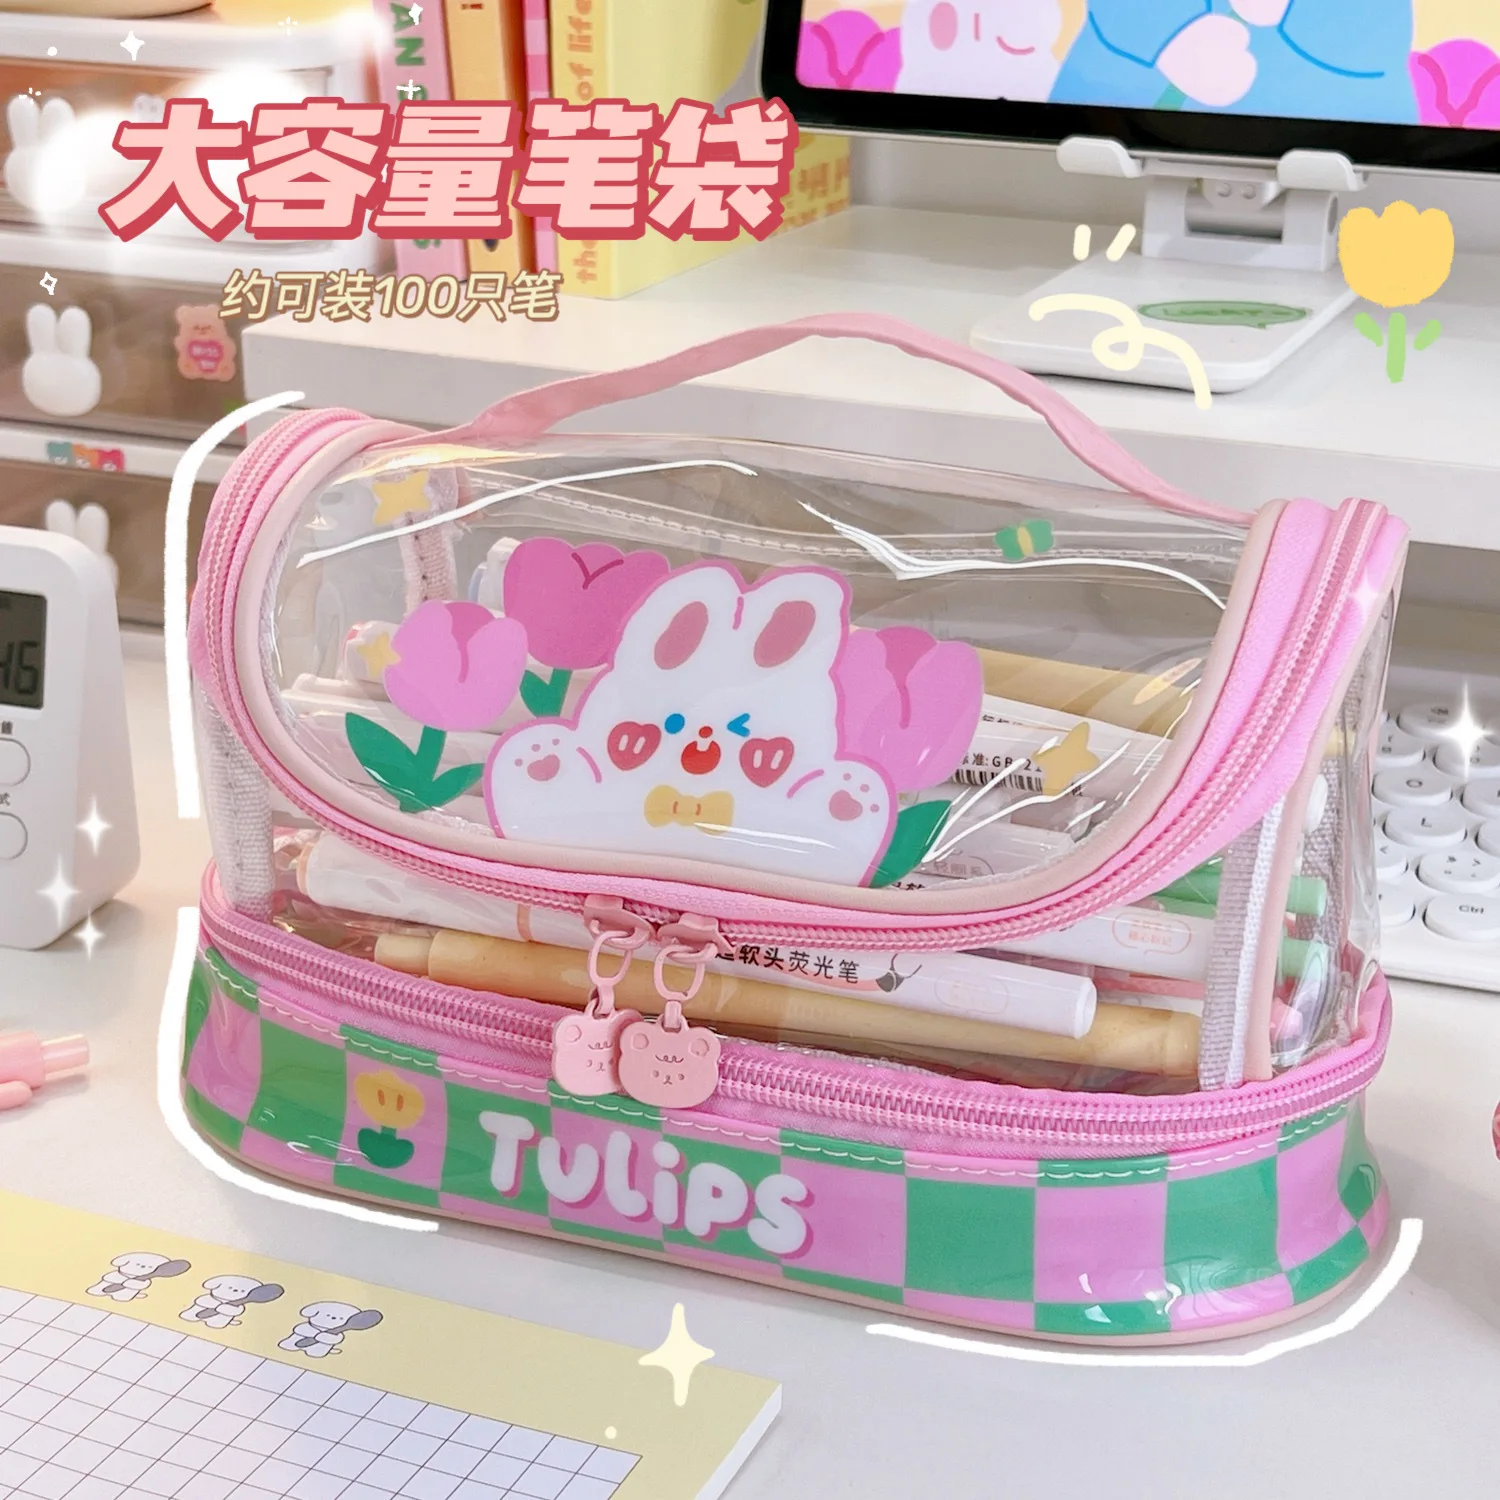 New Arrival Kawaii Multi-storey Big Capacity Pencil Case Cute Transparent Pencilcase Pouch Bag Gift School Stationery Supplies